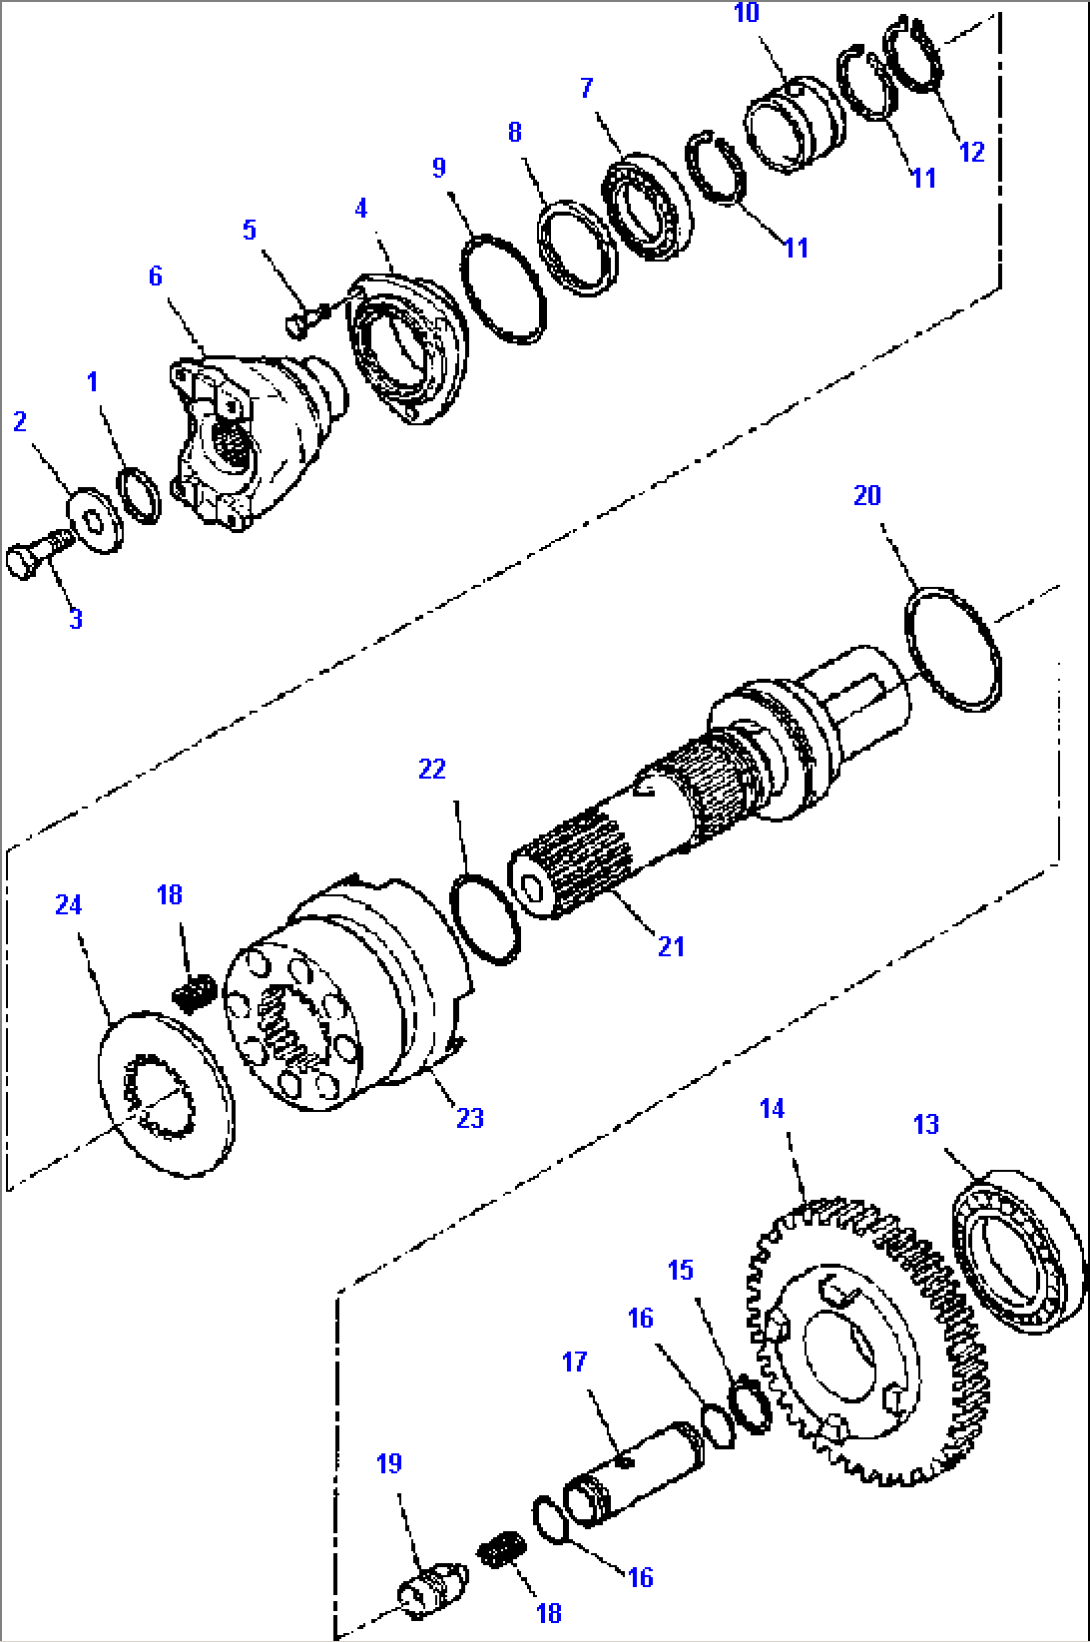 FIG. F3255-01A0 TRANSMISSION (4WD) - OUTPUT GEAR AND SHAFT